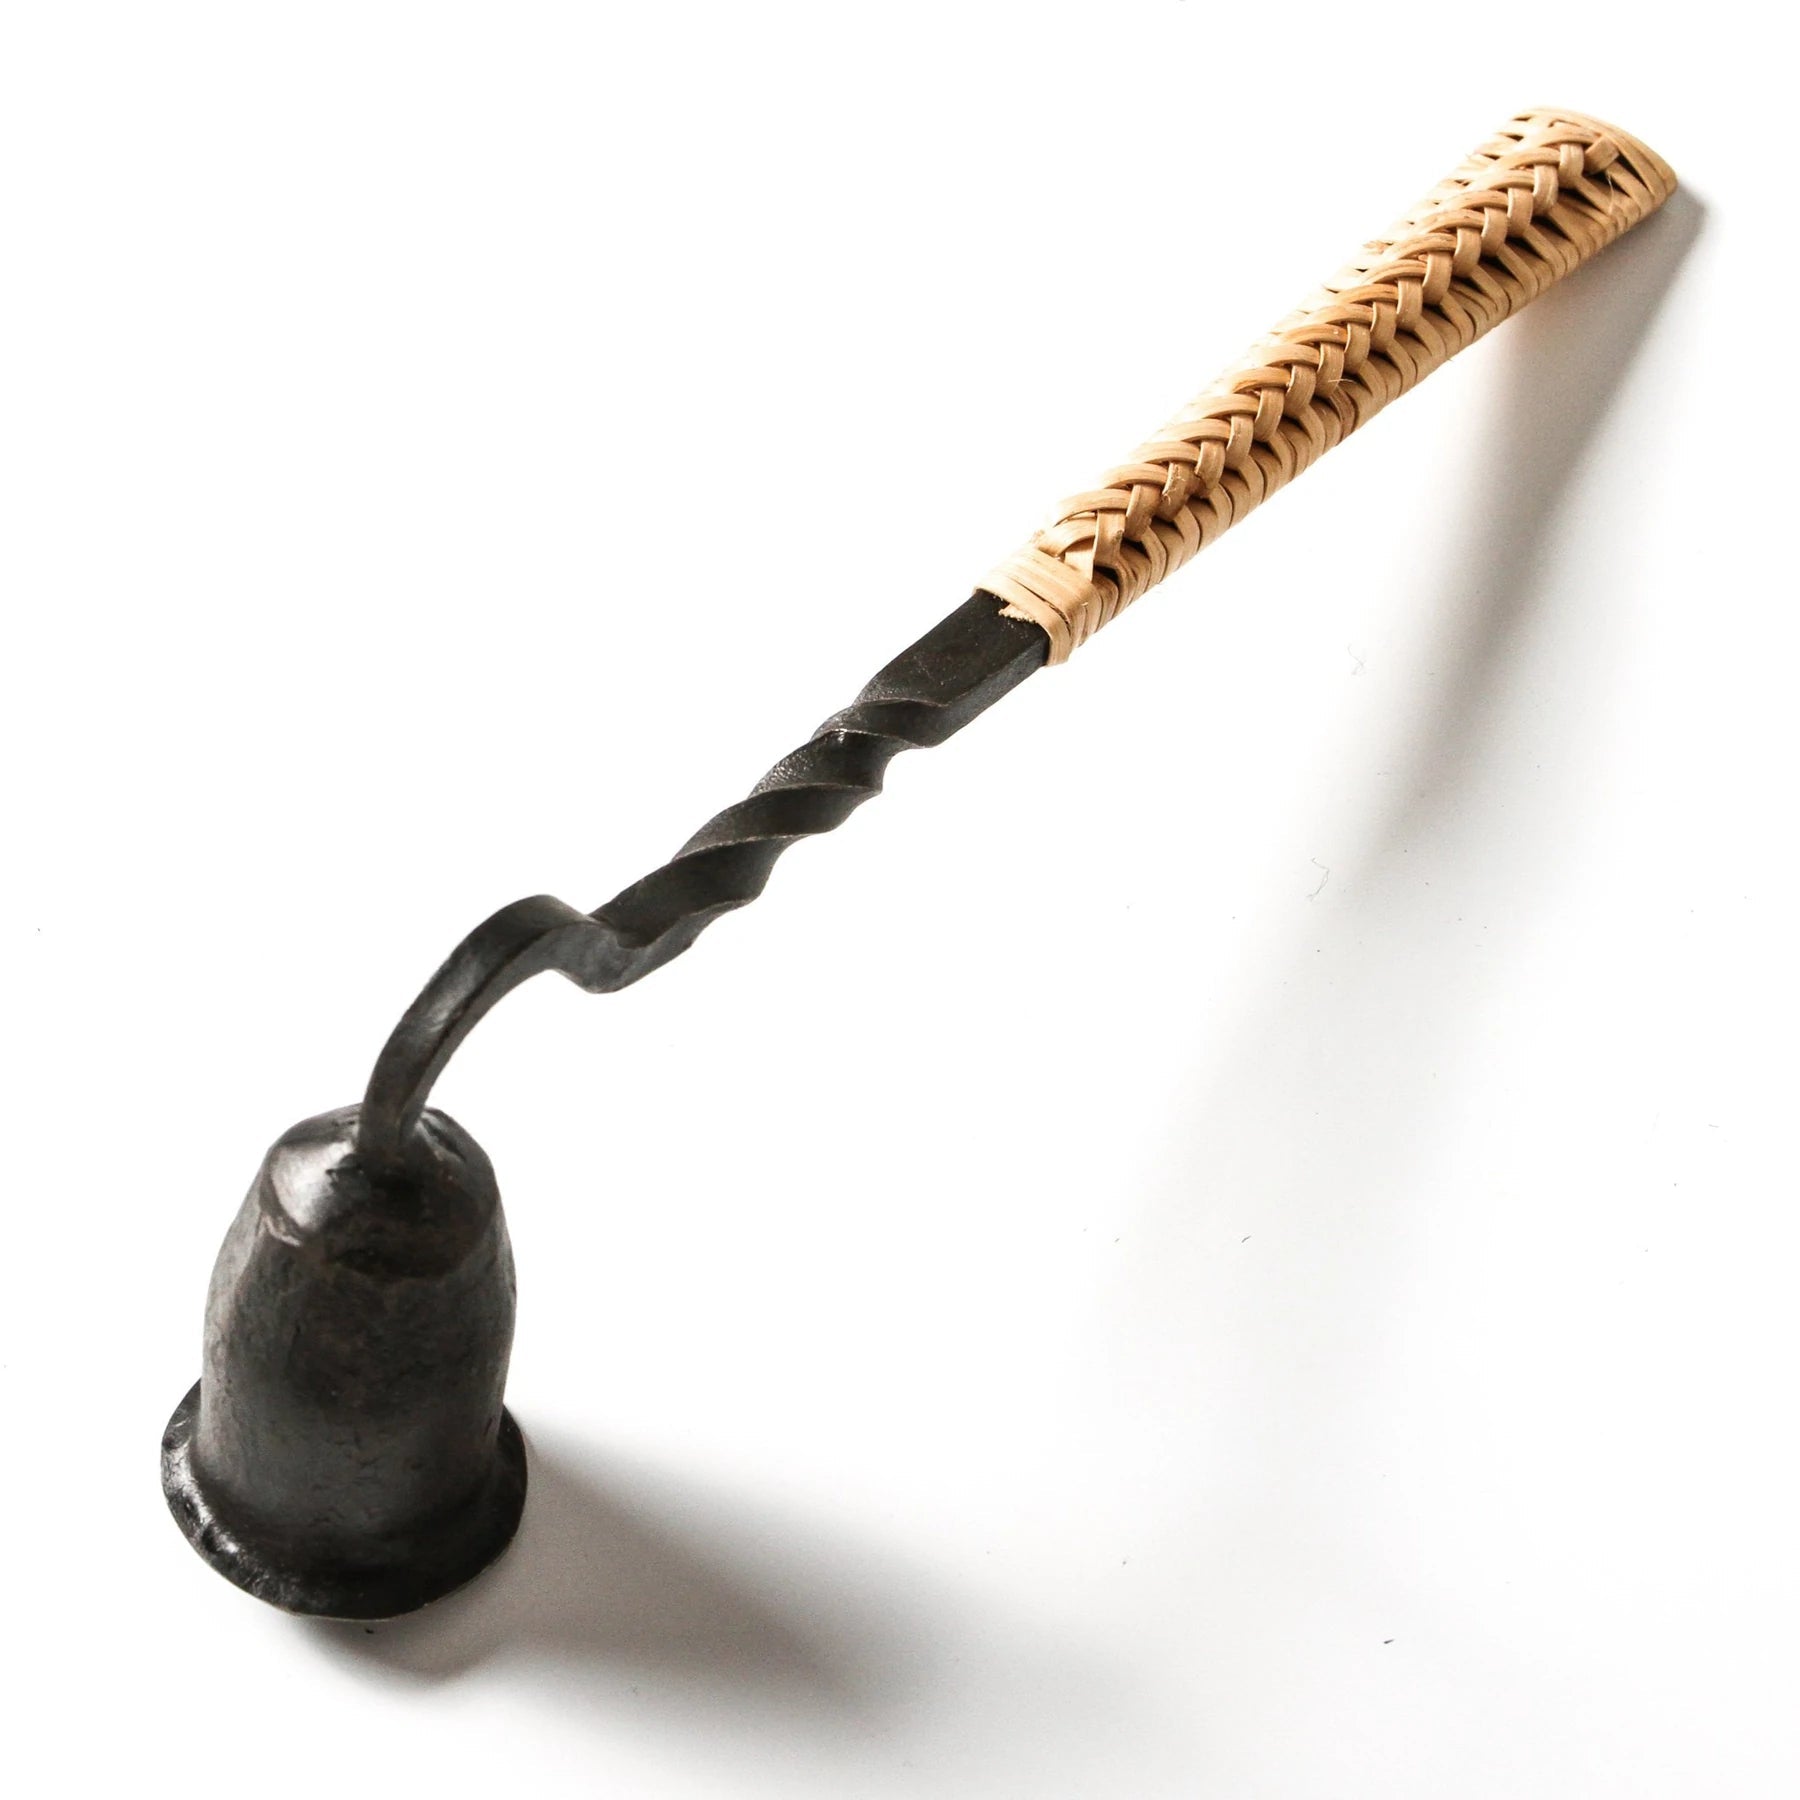 Gypsy Candle Snuffer - Alpineabode